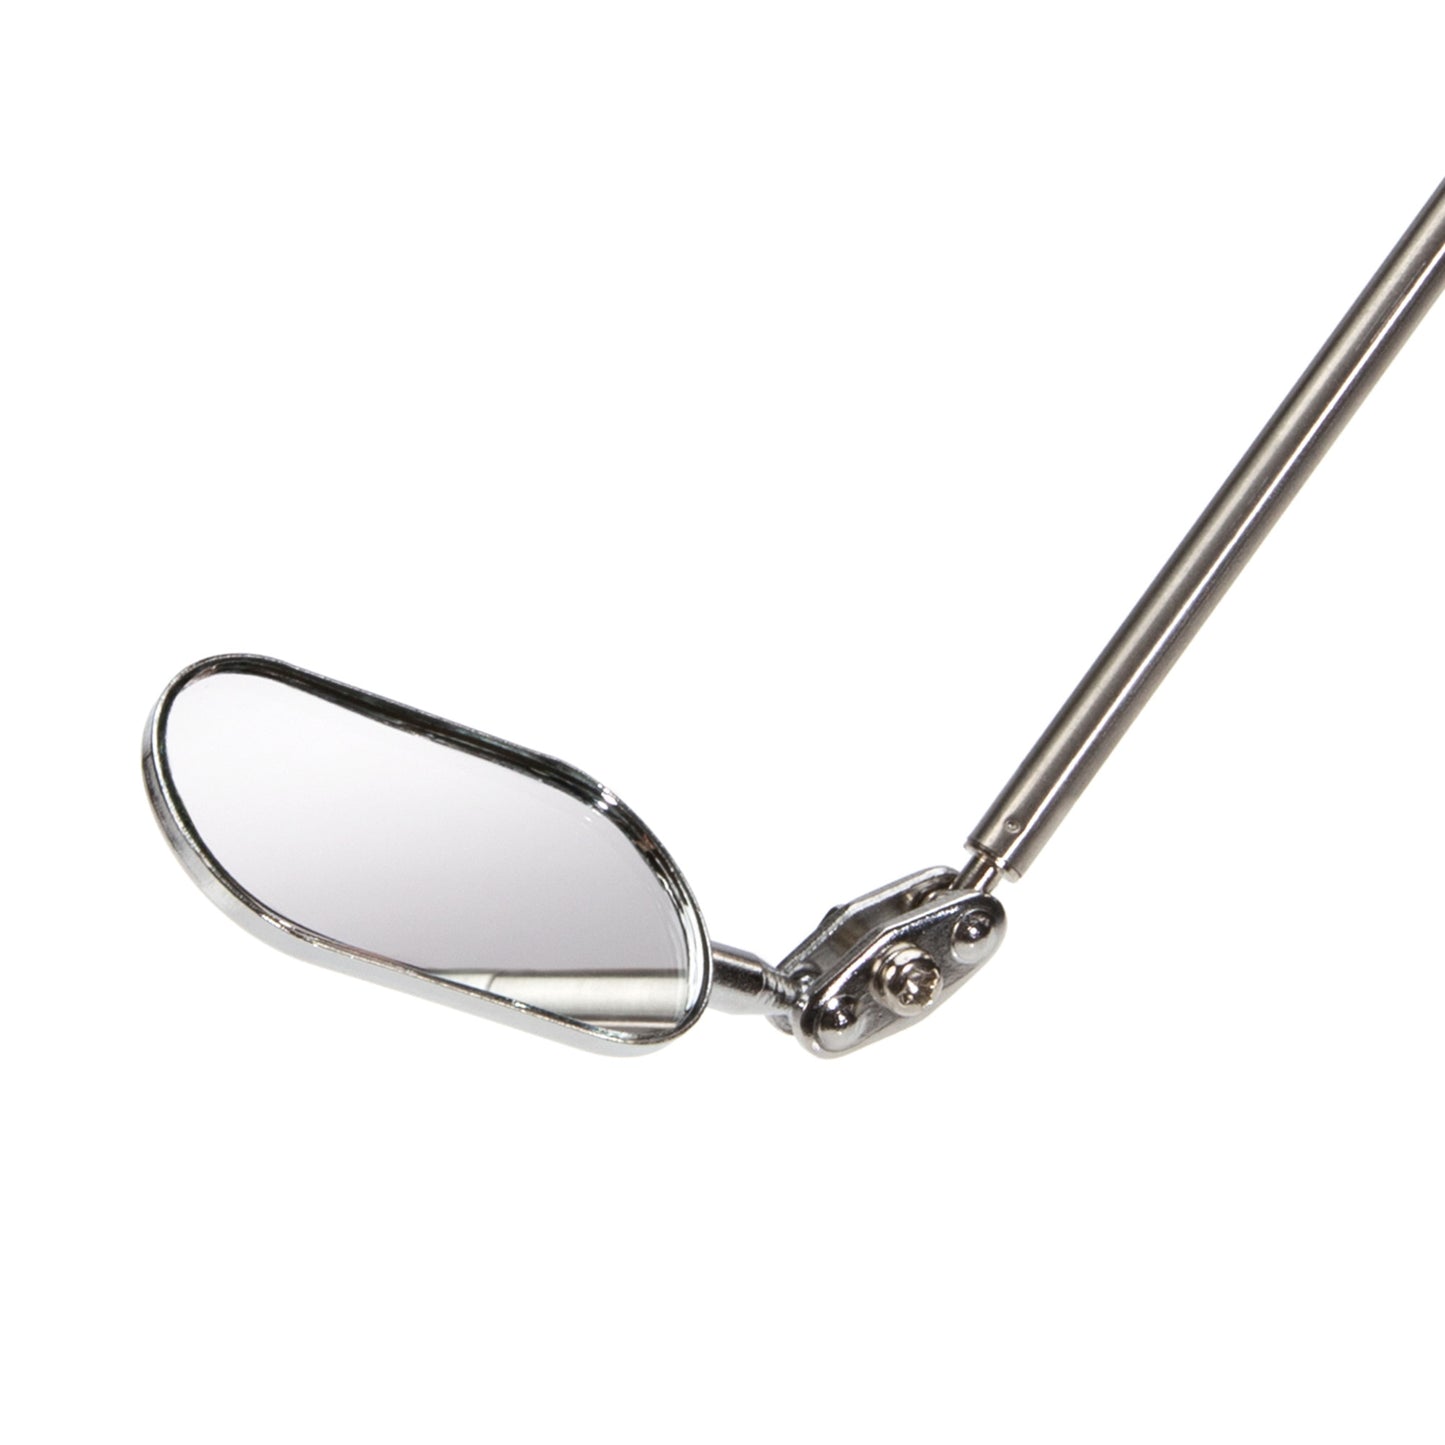 21-inch Telescoping 1-inch x 2-inch Articulating Inspection Mirror